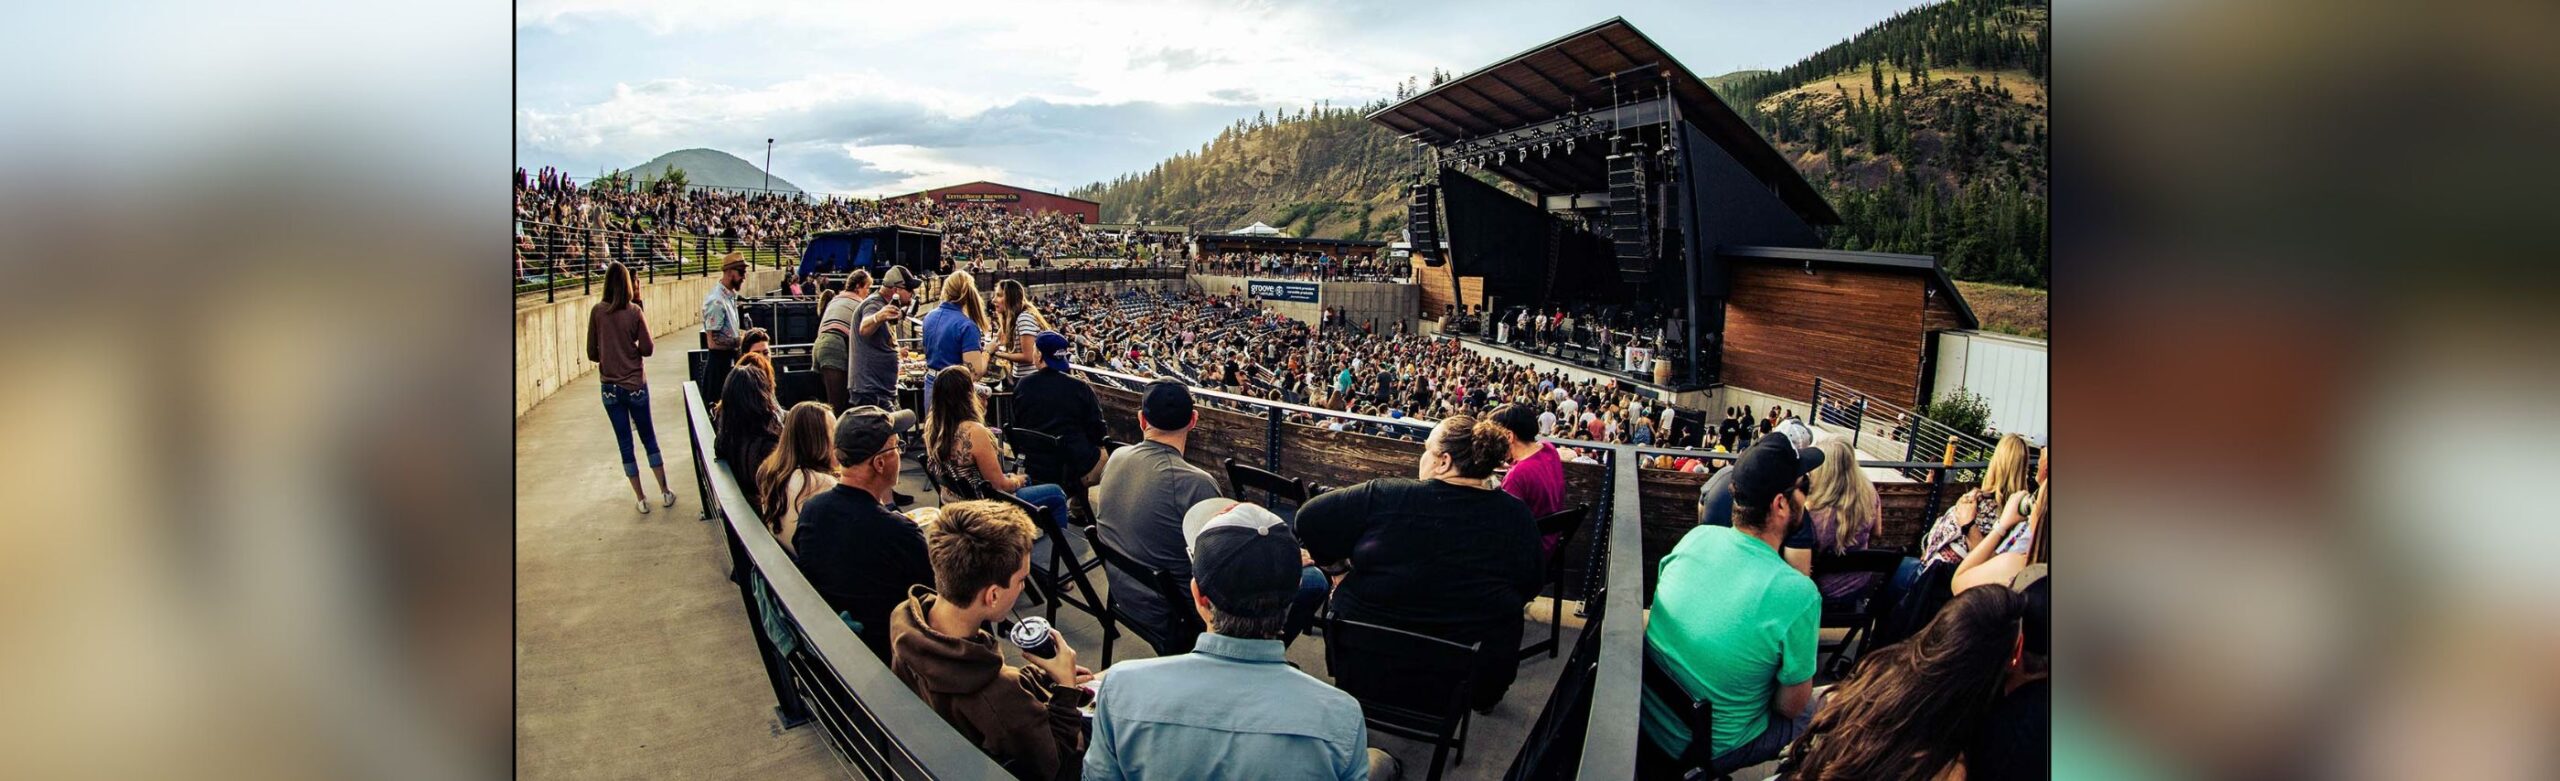 Now Available: Premium Box Seats for Flaming Lips at KettleHouse Amphitheater Image